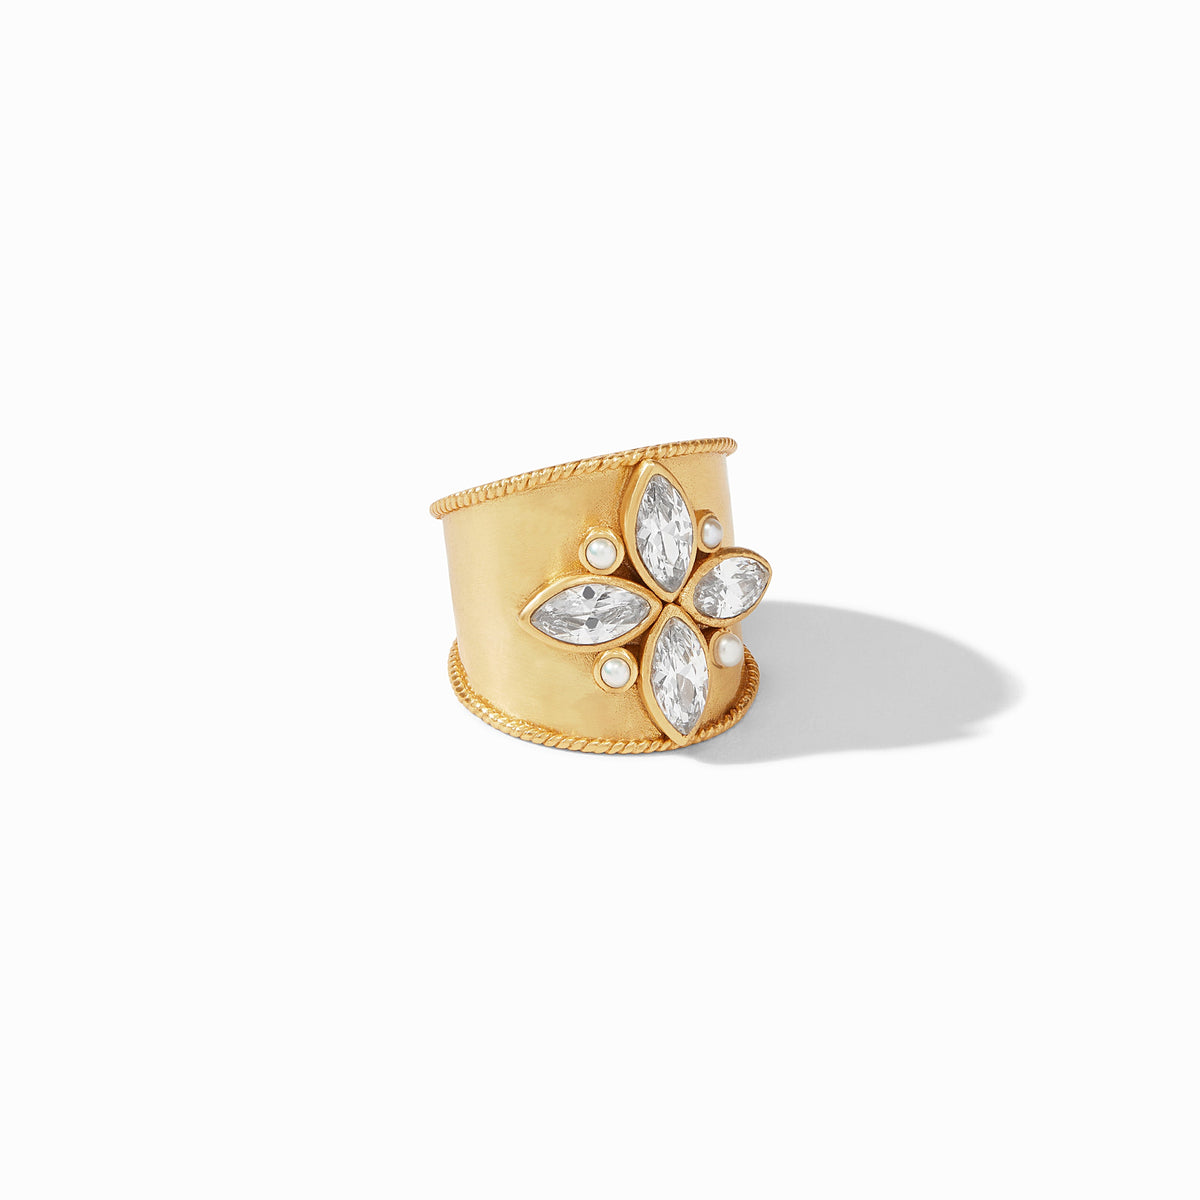 Julie Vos - Monaco Statement Ring, Cubic Zirconia and Pearl / 8